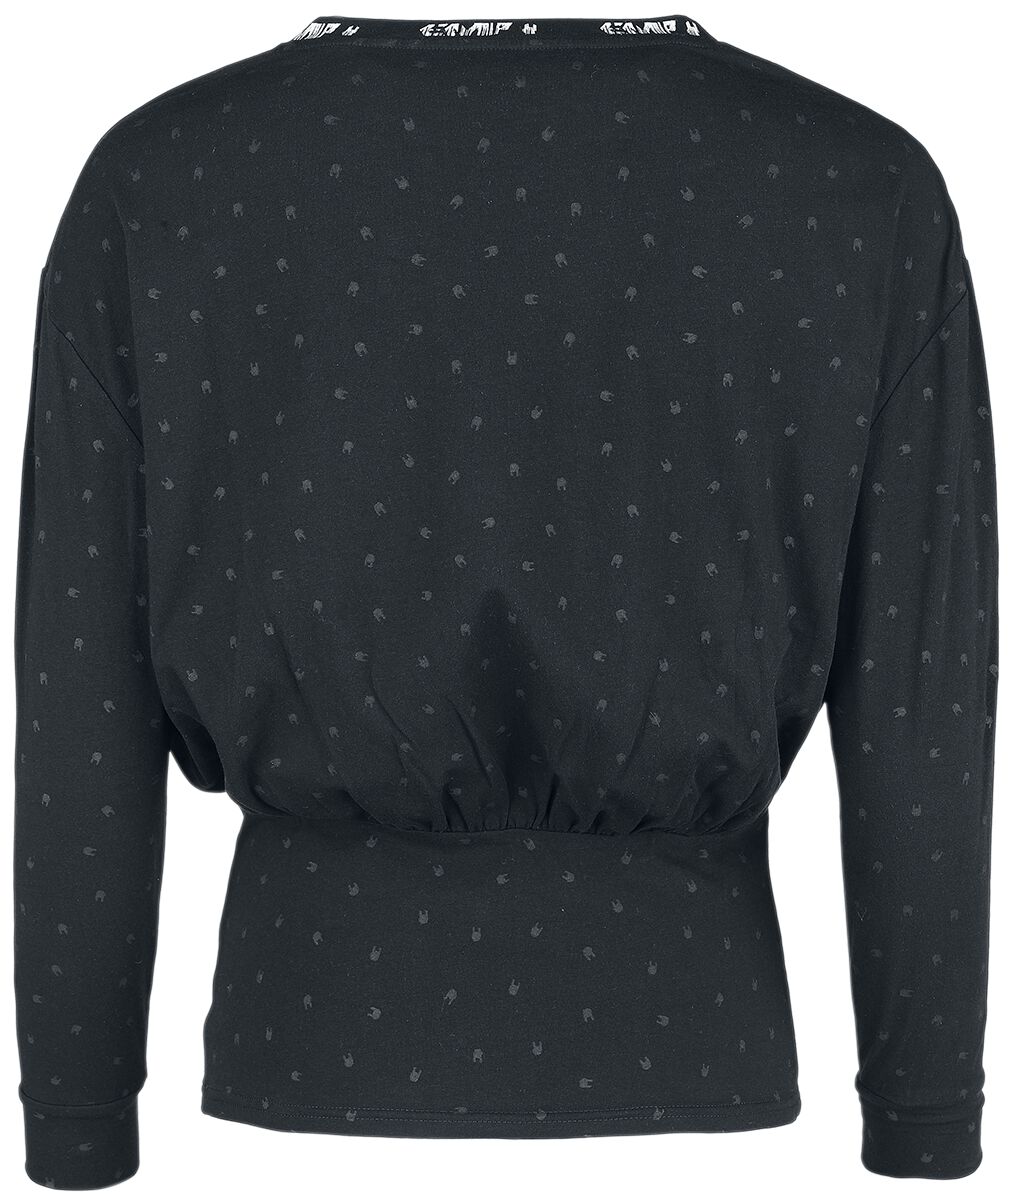 Long-sleeved shirt with all-over rock hand print | EMP Stage Collection ...